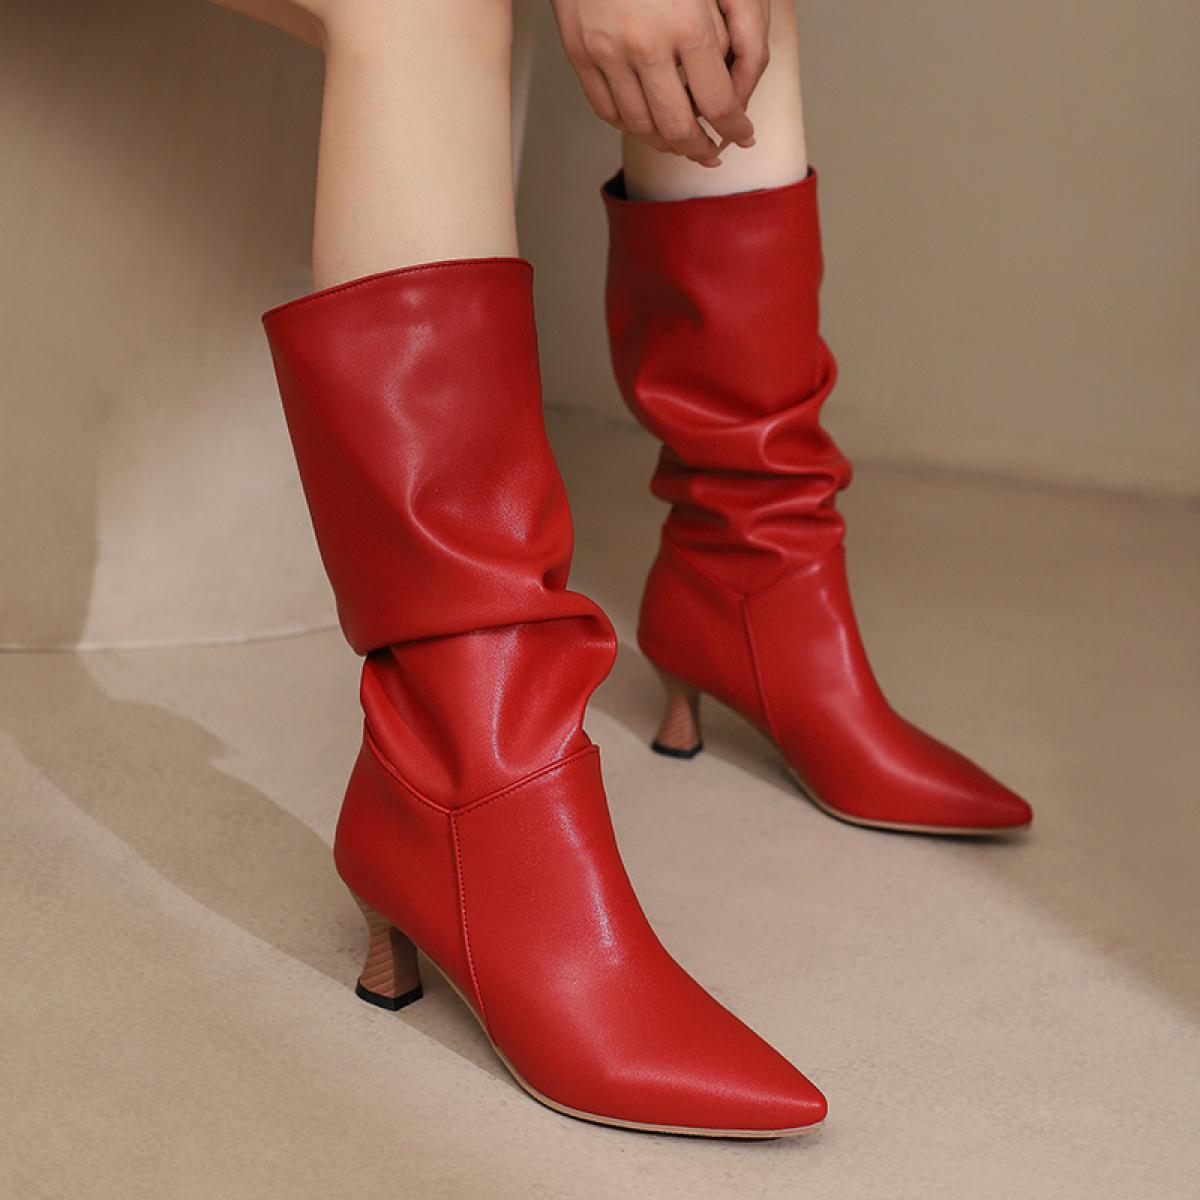 Folds Boots Woman Fashion New Poined Toe Shoes Lady Daily Long Boots 5cm High Heels Boots Women Size 43